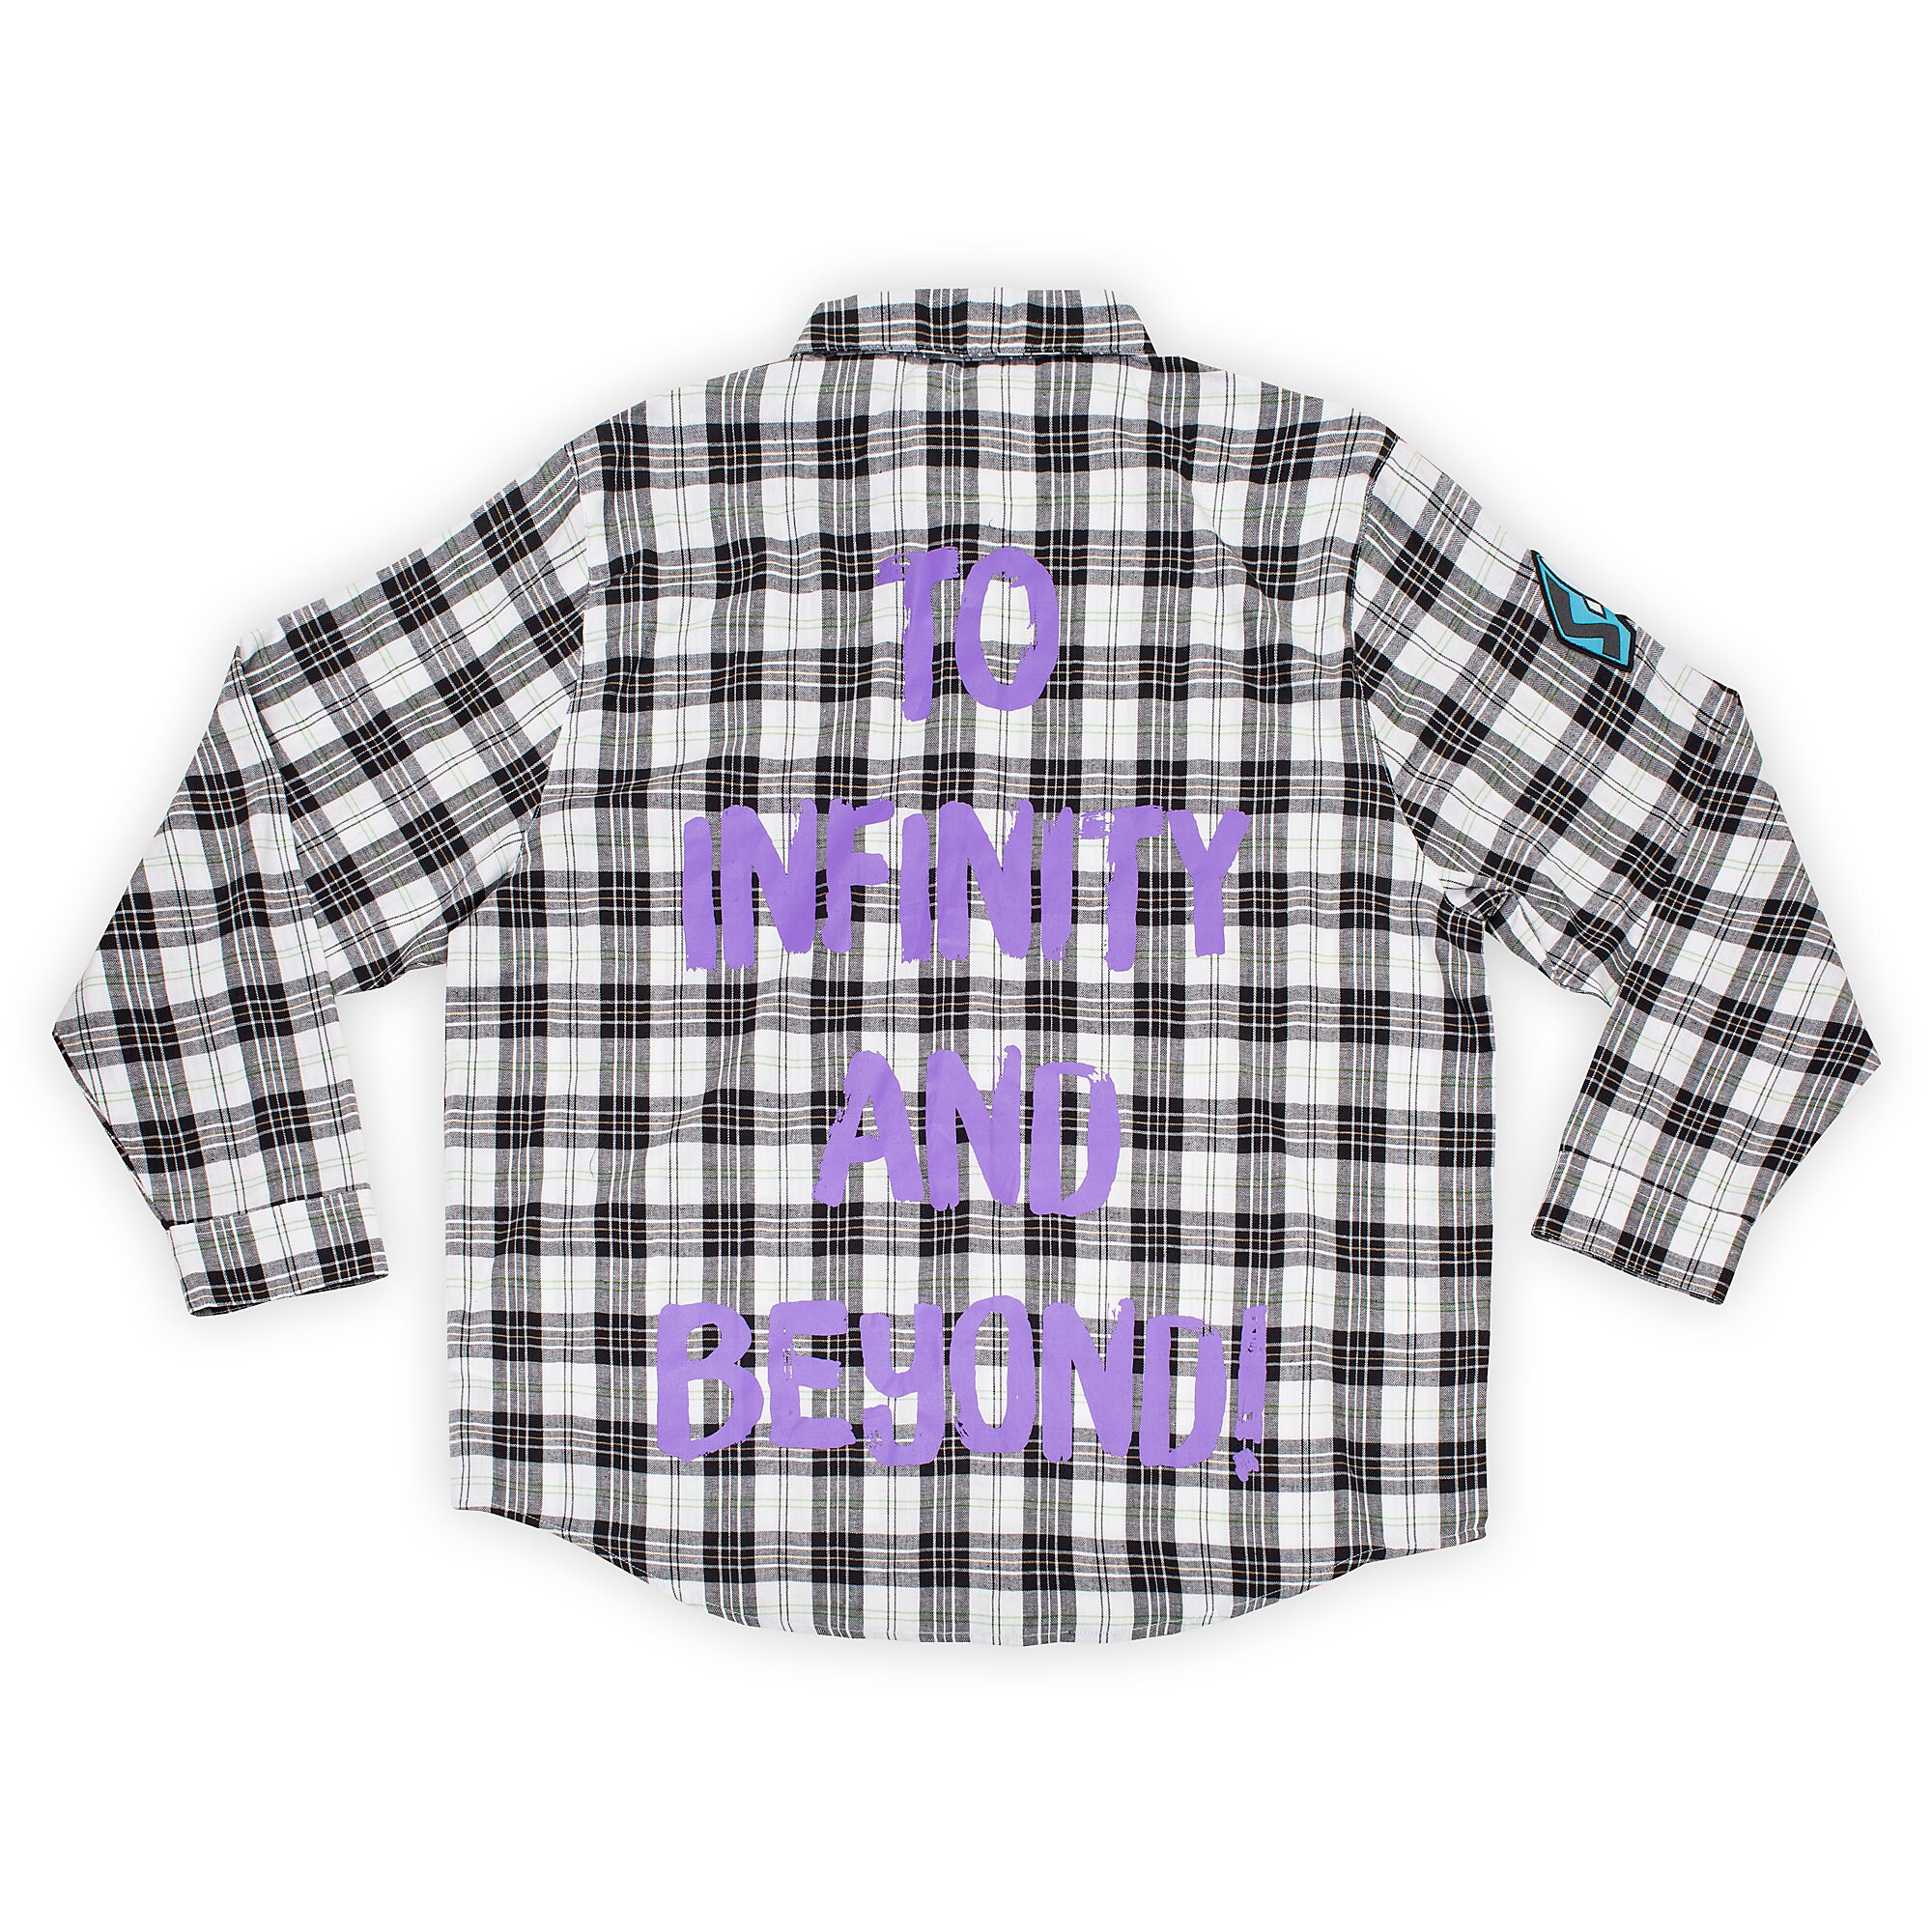 Buzz Lightyear Flannel Shirt for Adults by Cakeworthy - Toy Story 4